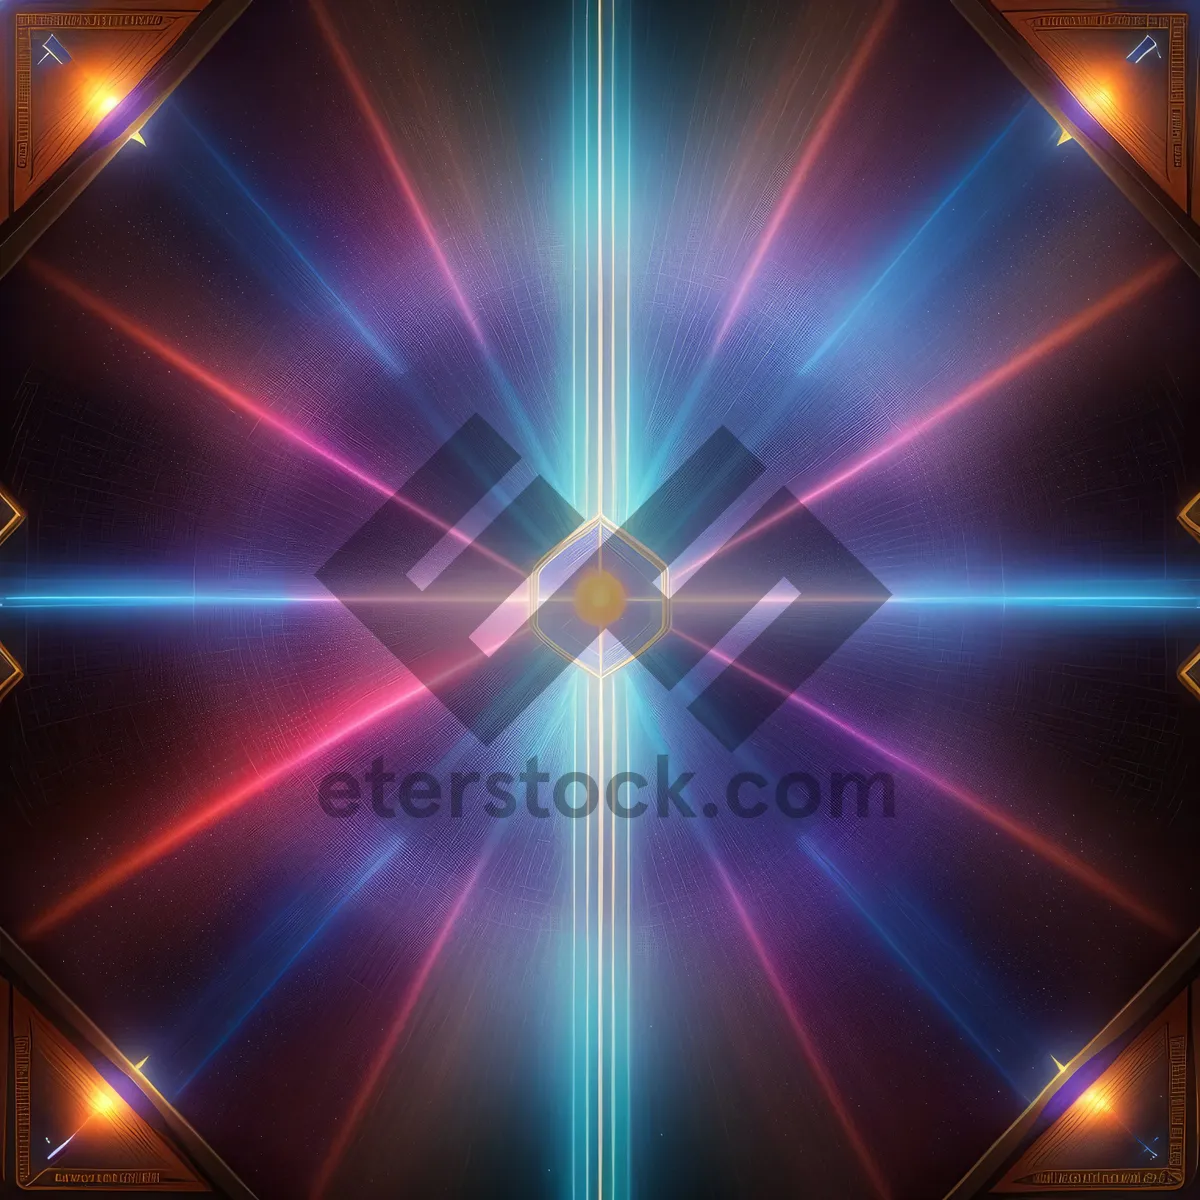 Picture of Vibrant Fractal Energy Explosion: A Creative Digital Art